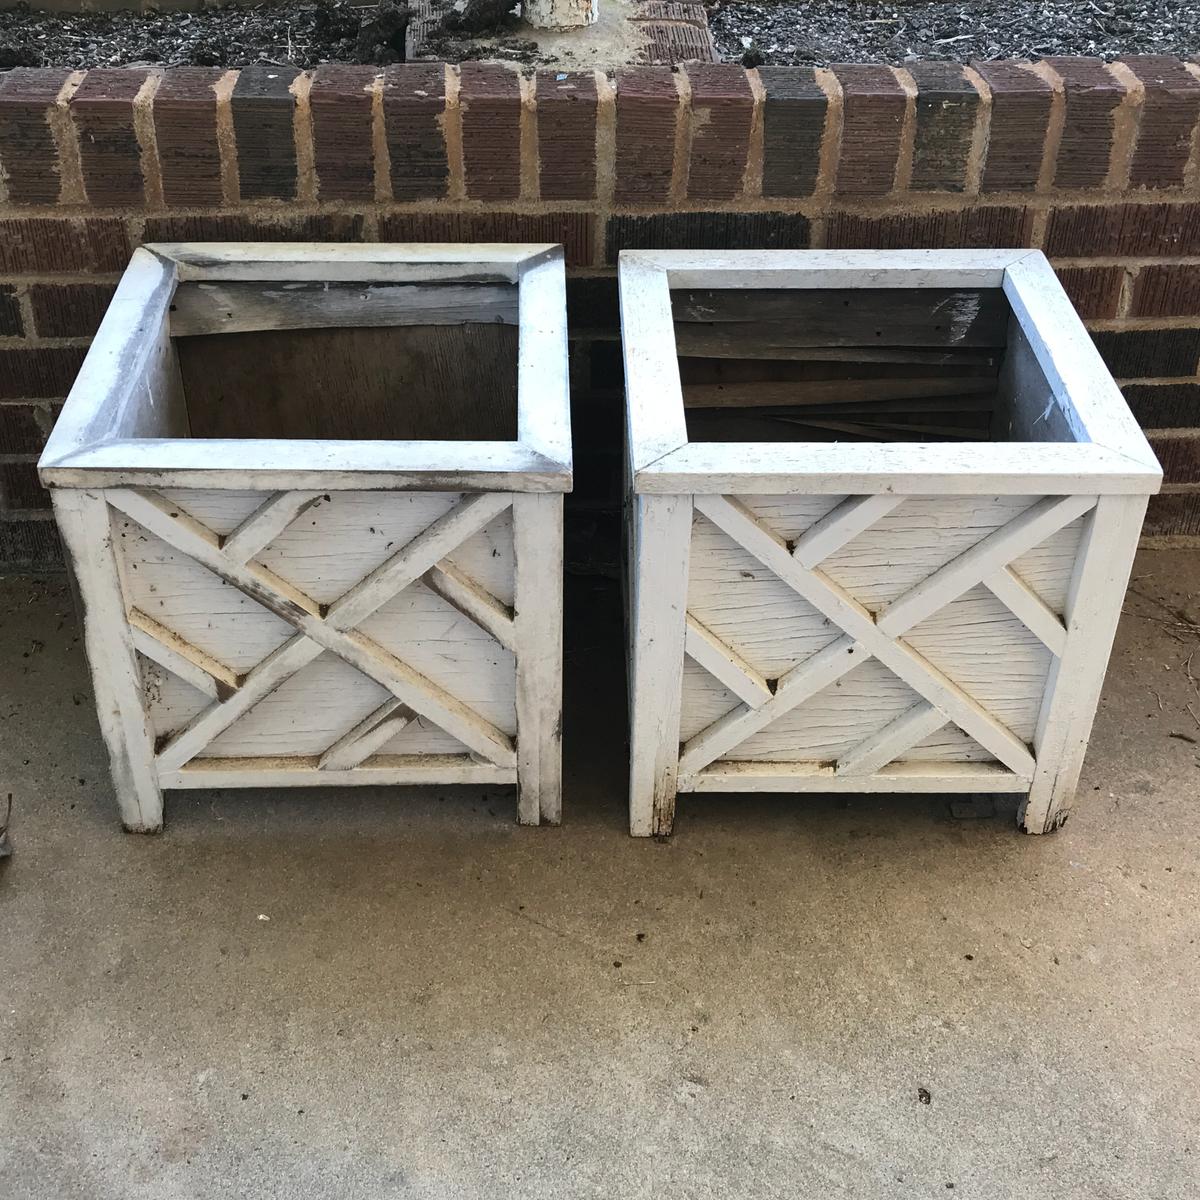 Pair of White Wooden Outdoor Planters